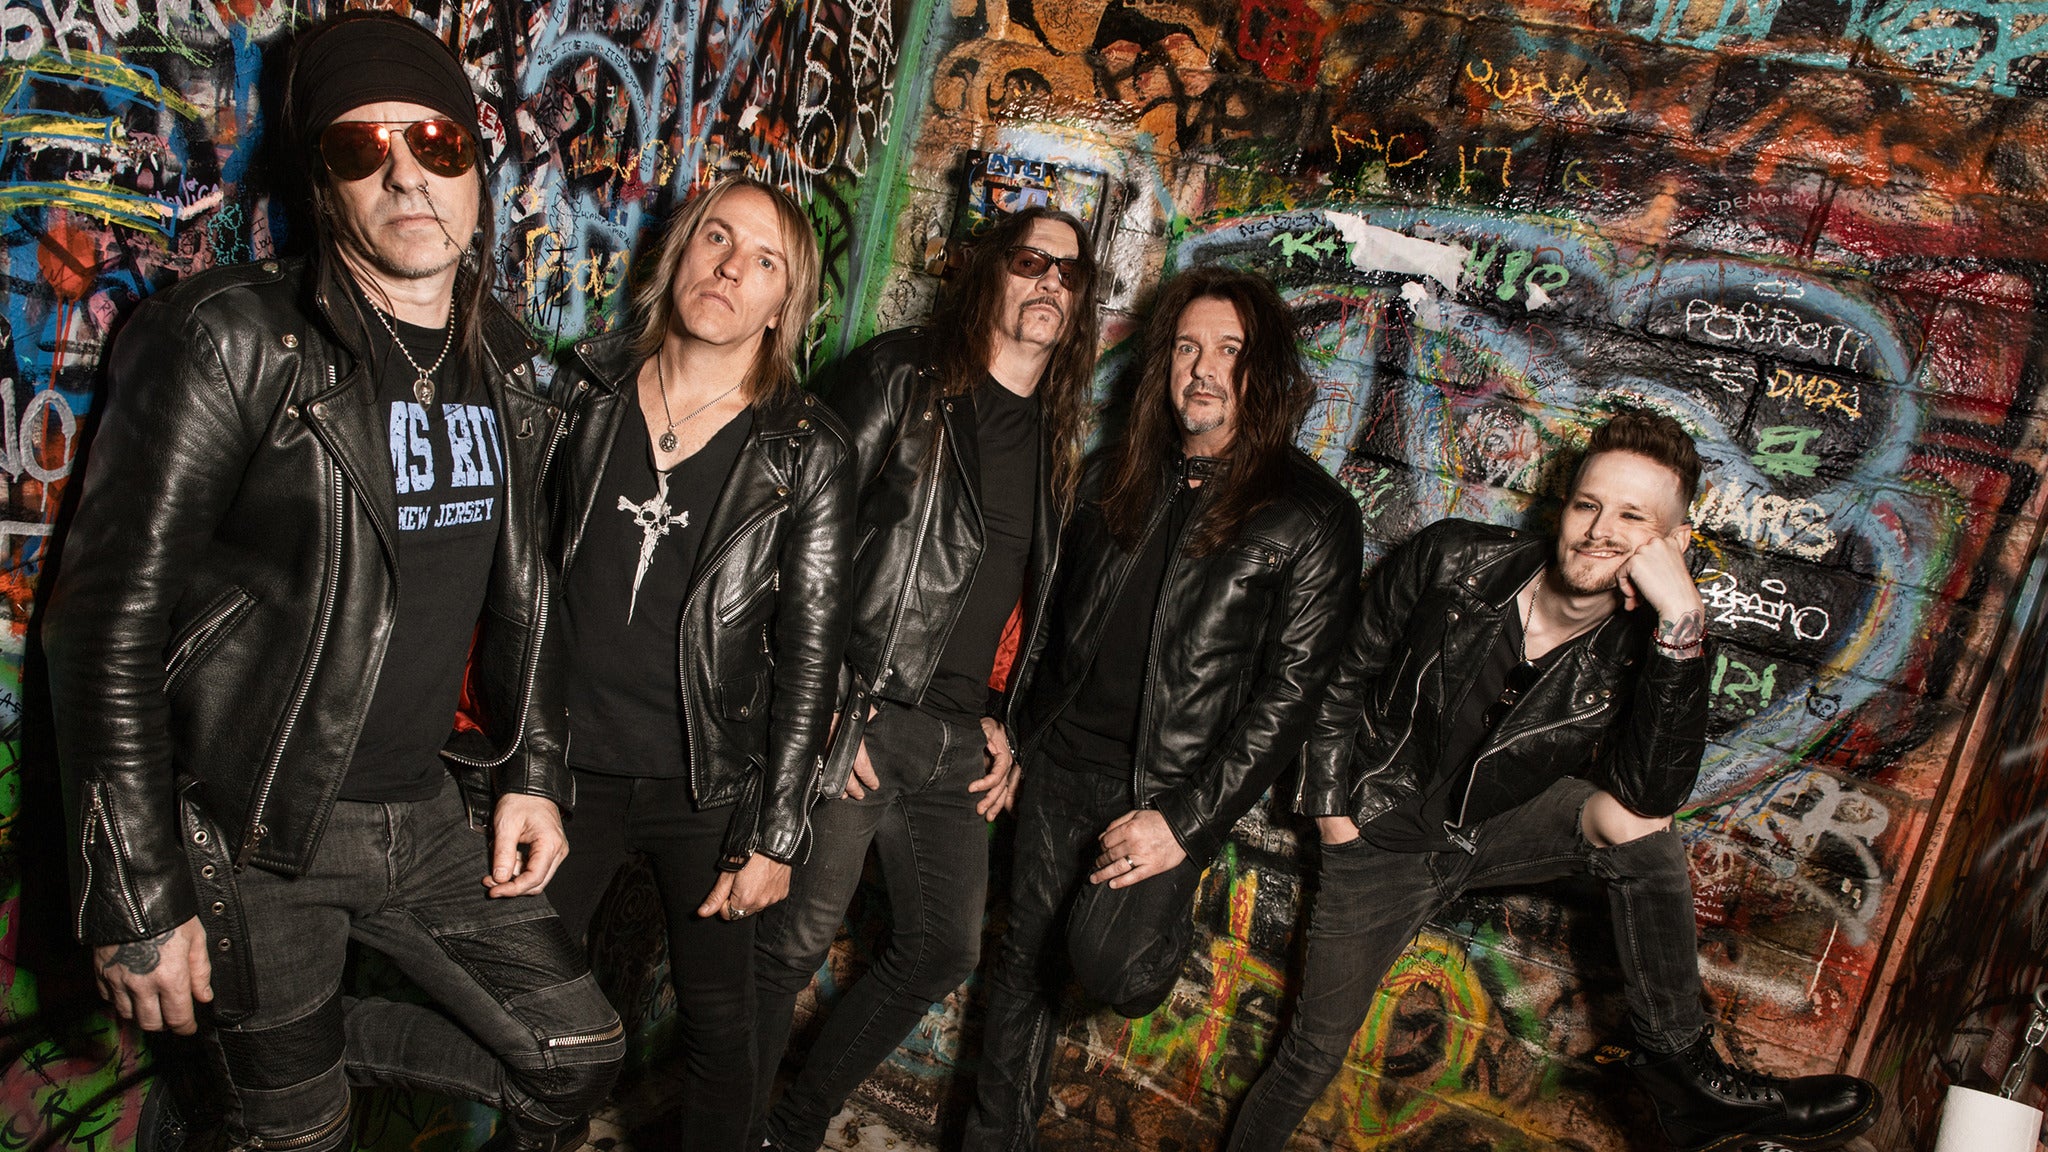 LIVE TO ROCK TOUR featuring SKID ROW, WARRANT, Winger and Quiet Riot